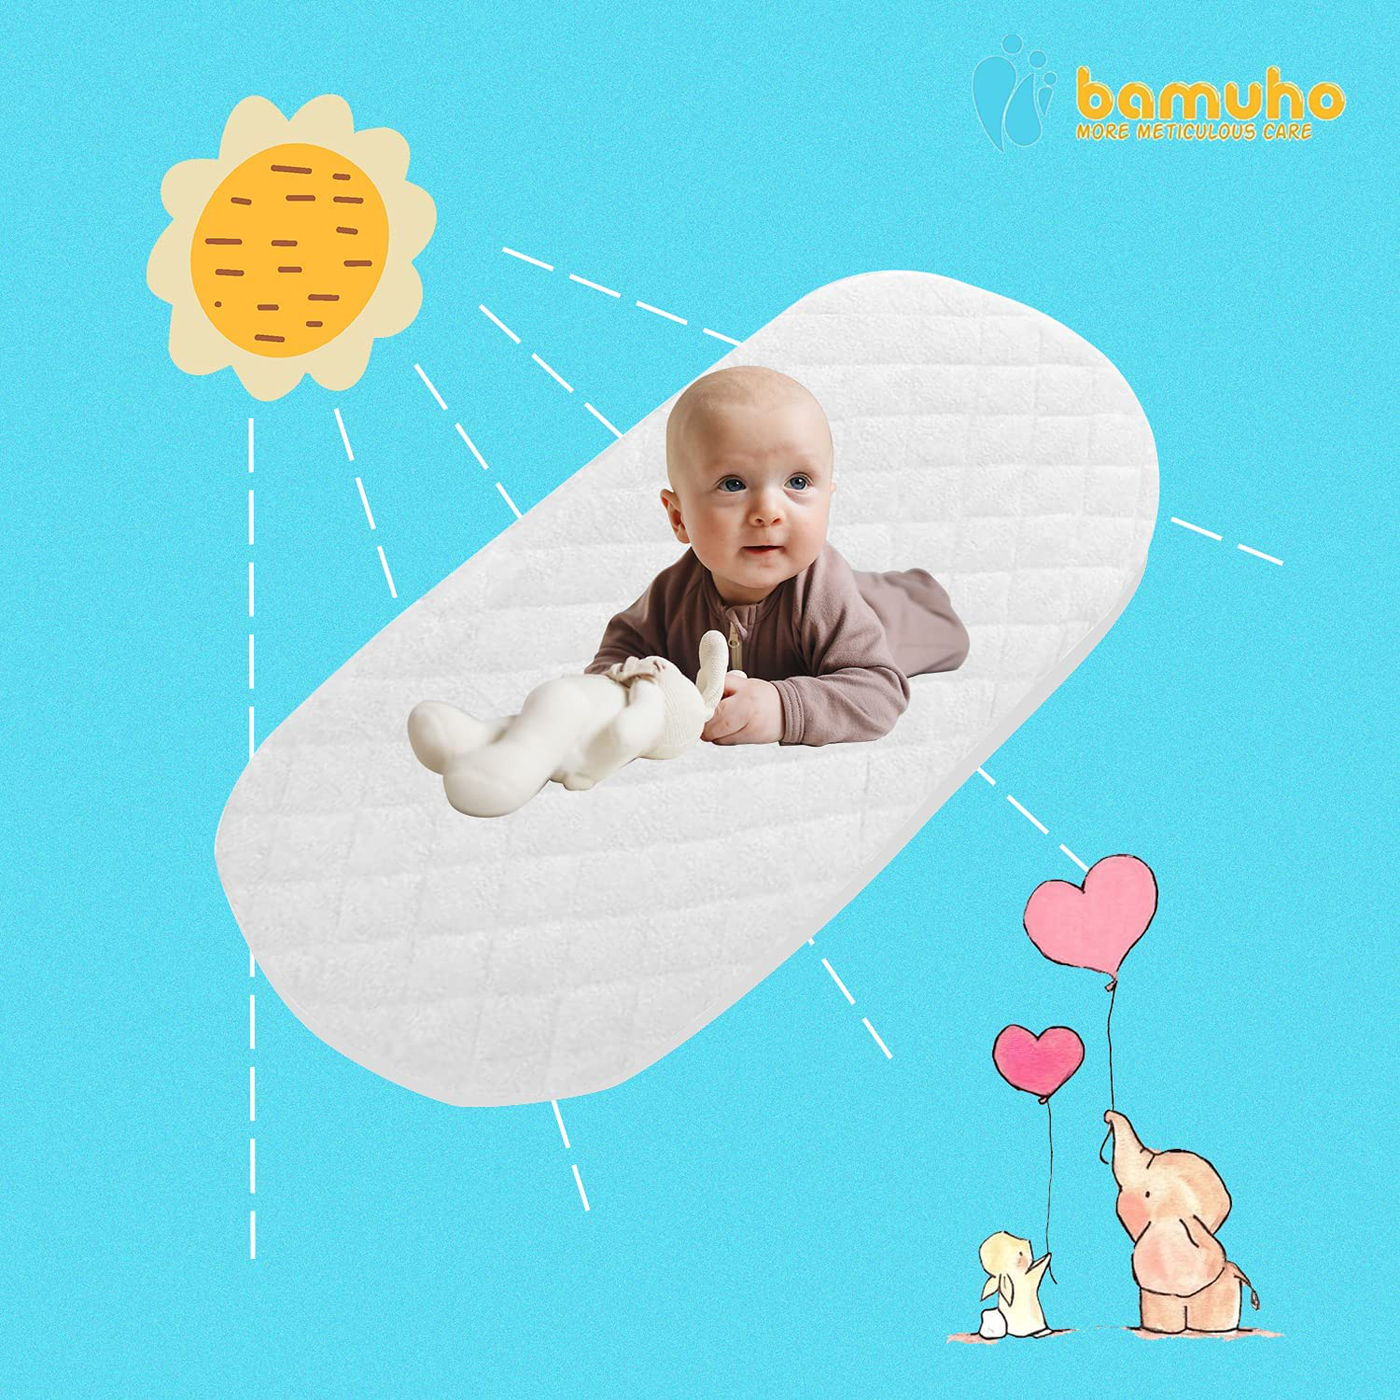 Bamuho Waterproof Halo Bassinet Mattress Pad Cover/ Protector Fit Hourglass Swivel Sleeper Mattress Pad , Comfortable and Soft Bamboo Fabric，White